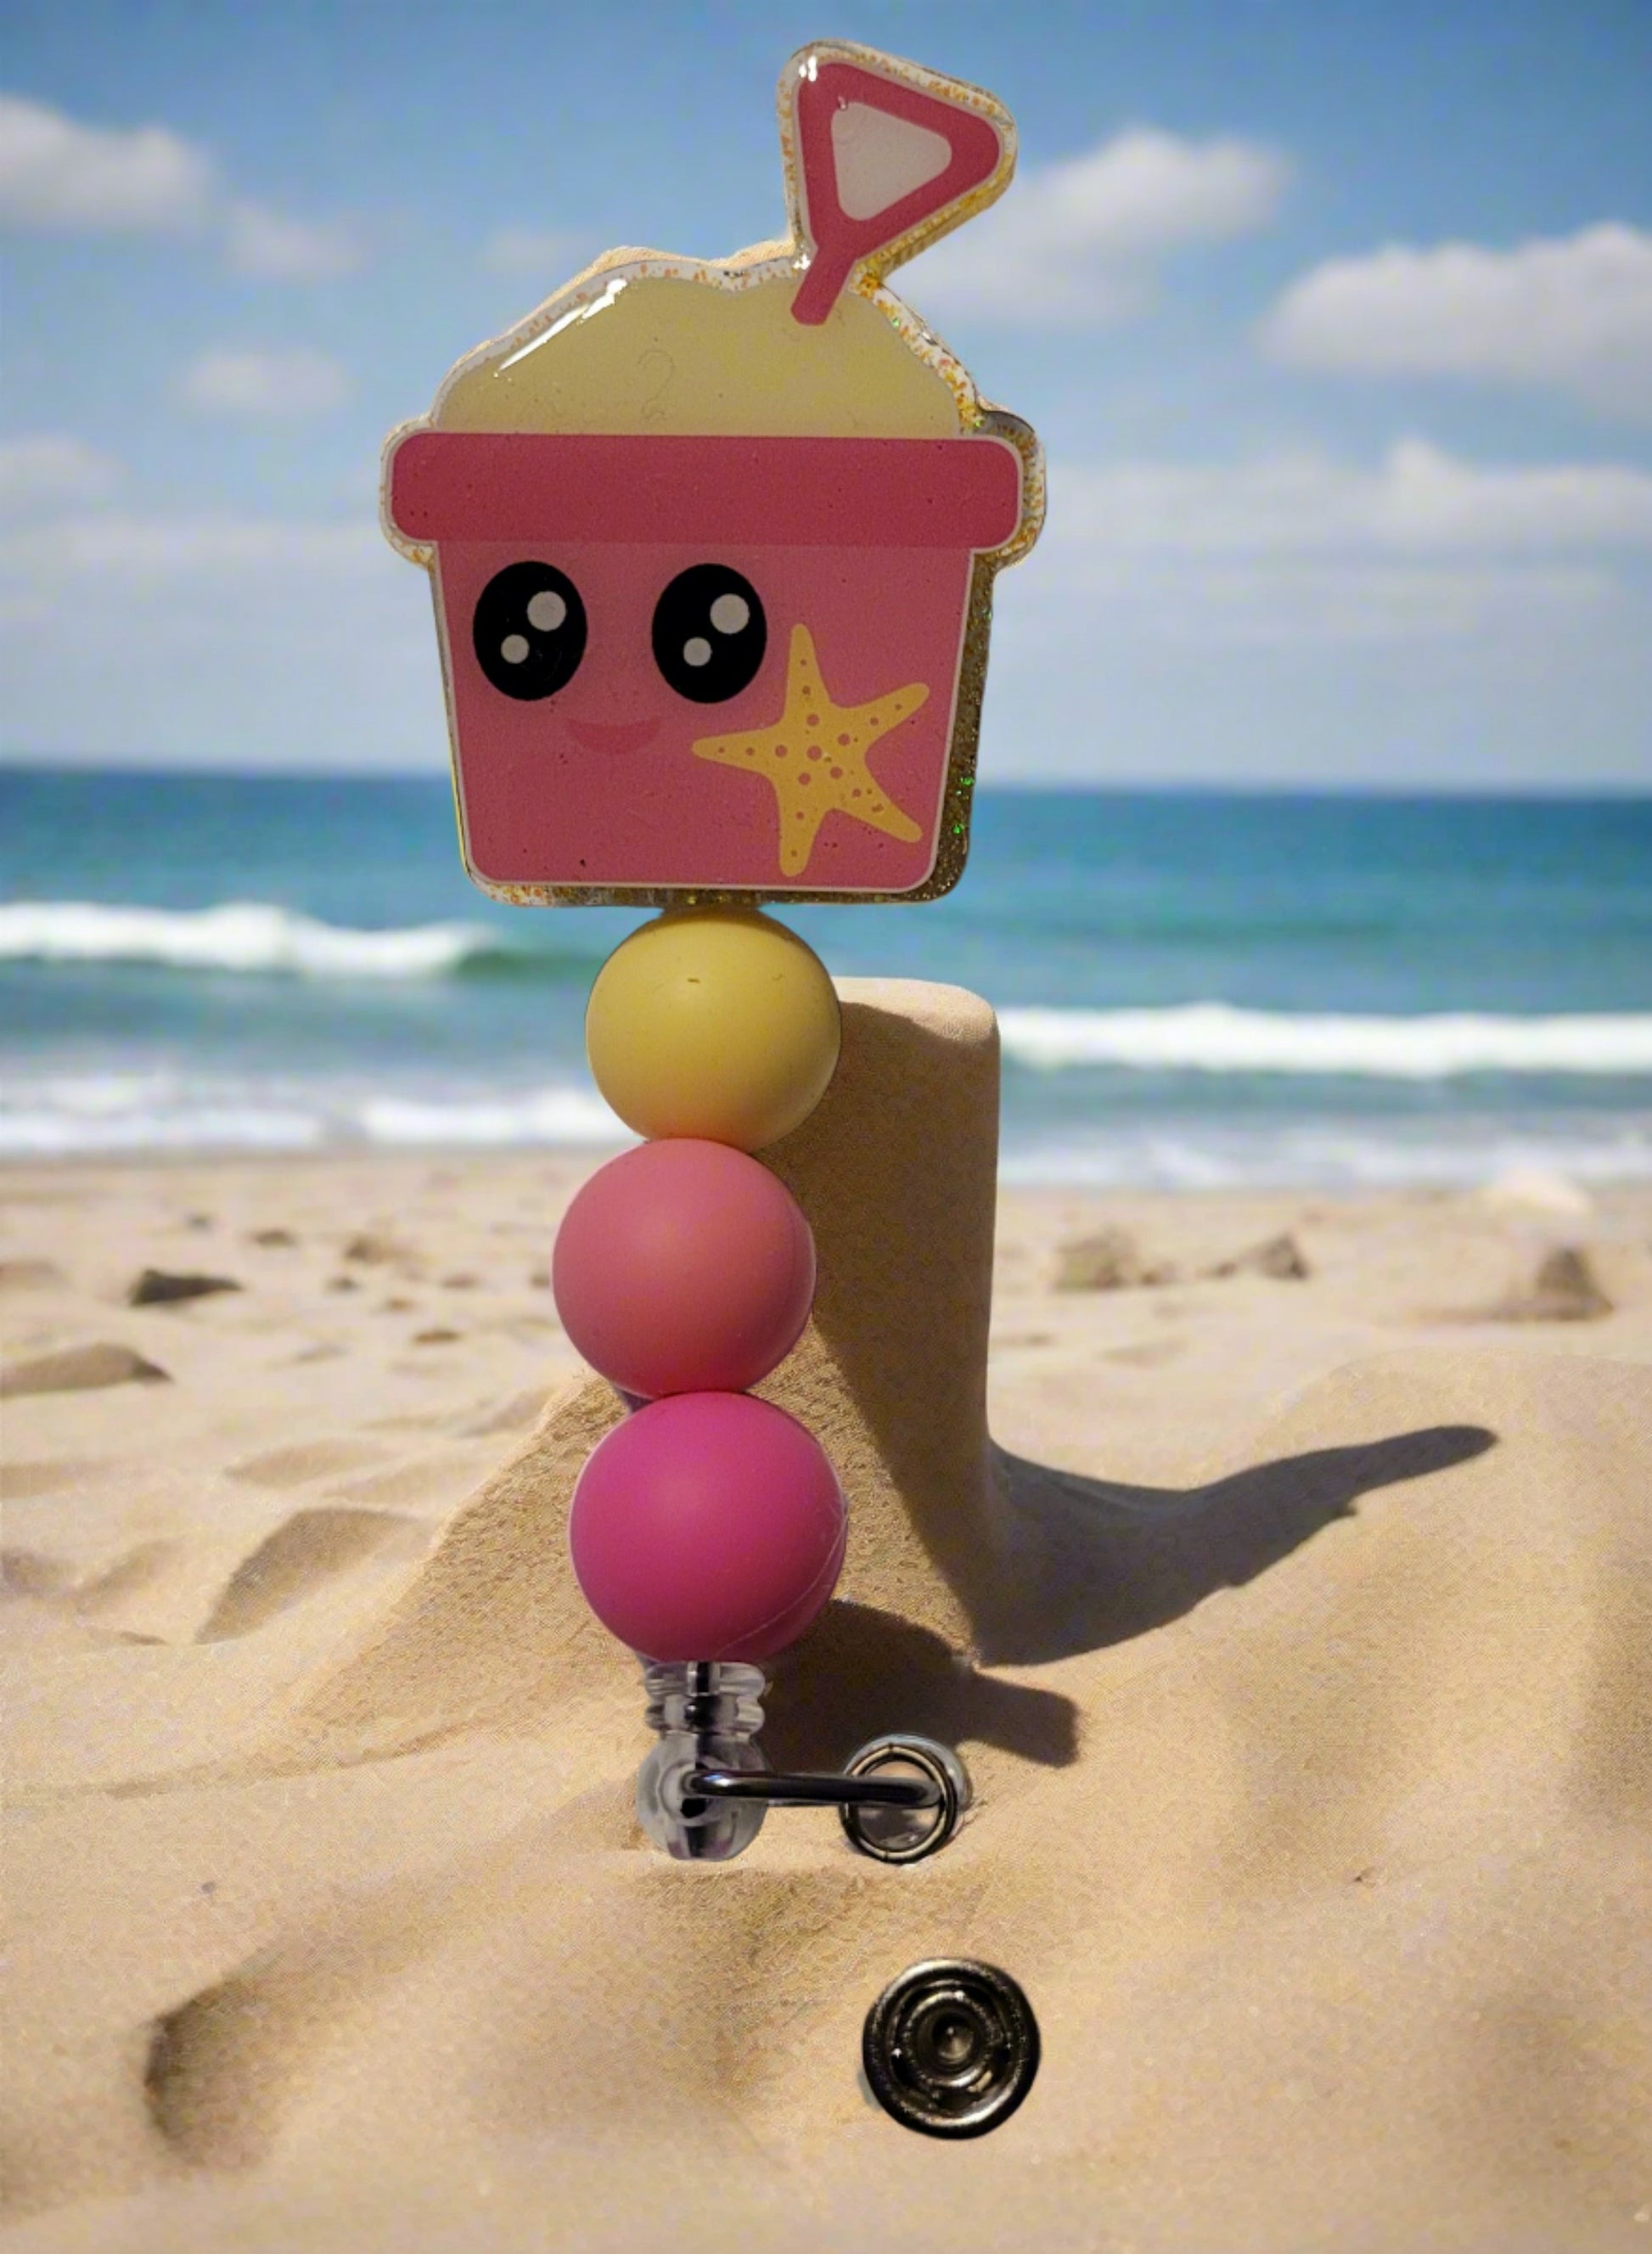 Heading to the beach? Grab your shovel &amp; pail for some sandy fun! With a cheerful pink pail adorned with a bright yellow star fish and color-coordinated silicone beads to top it off.